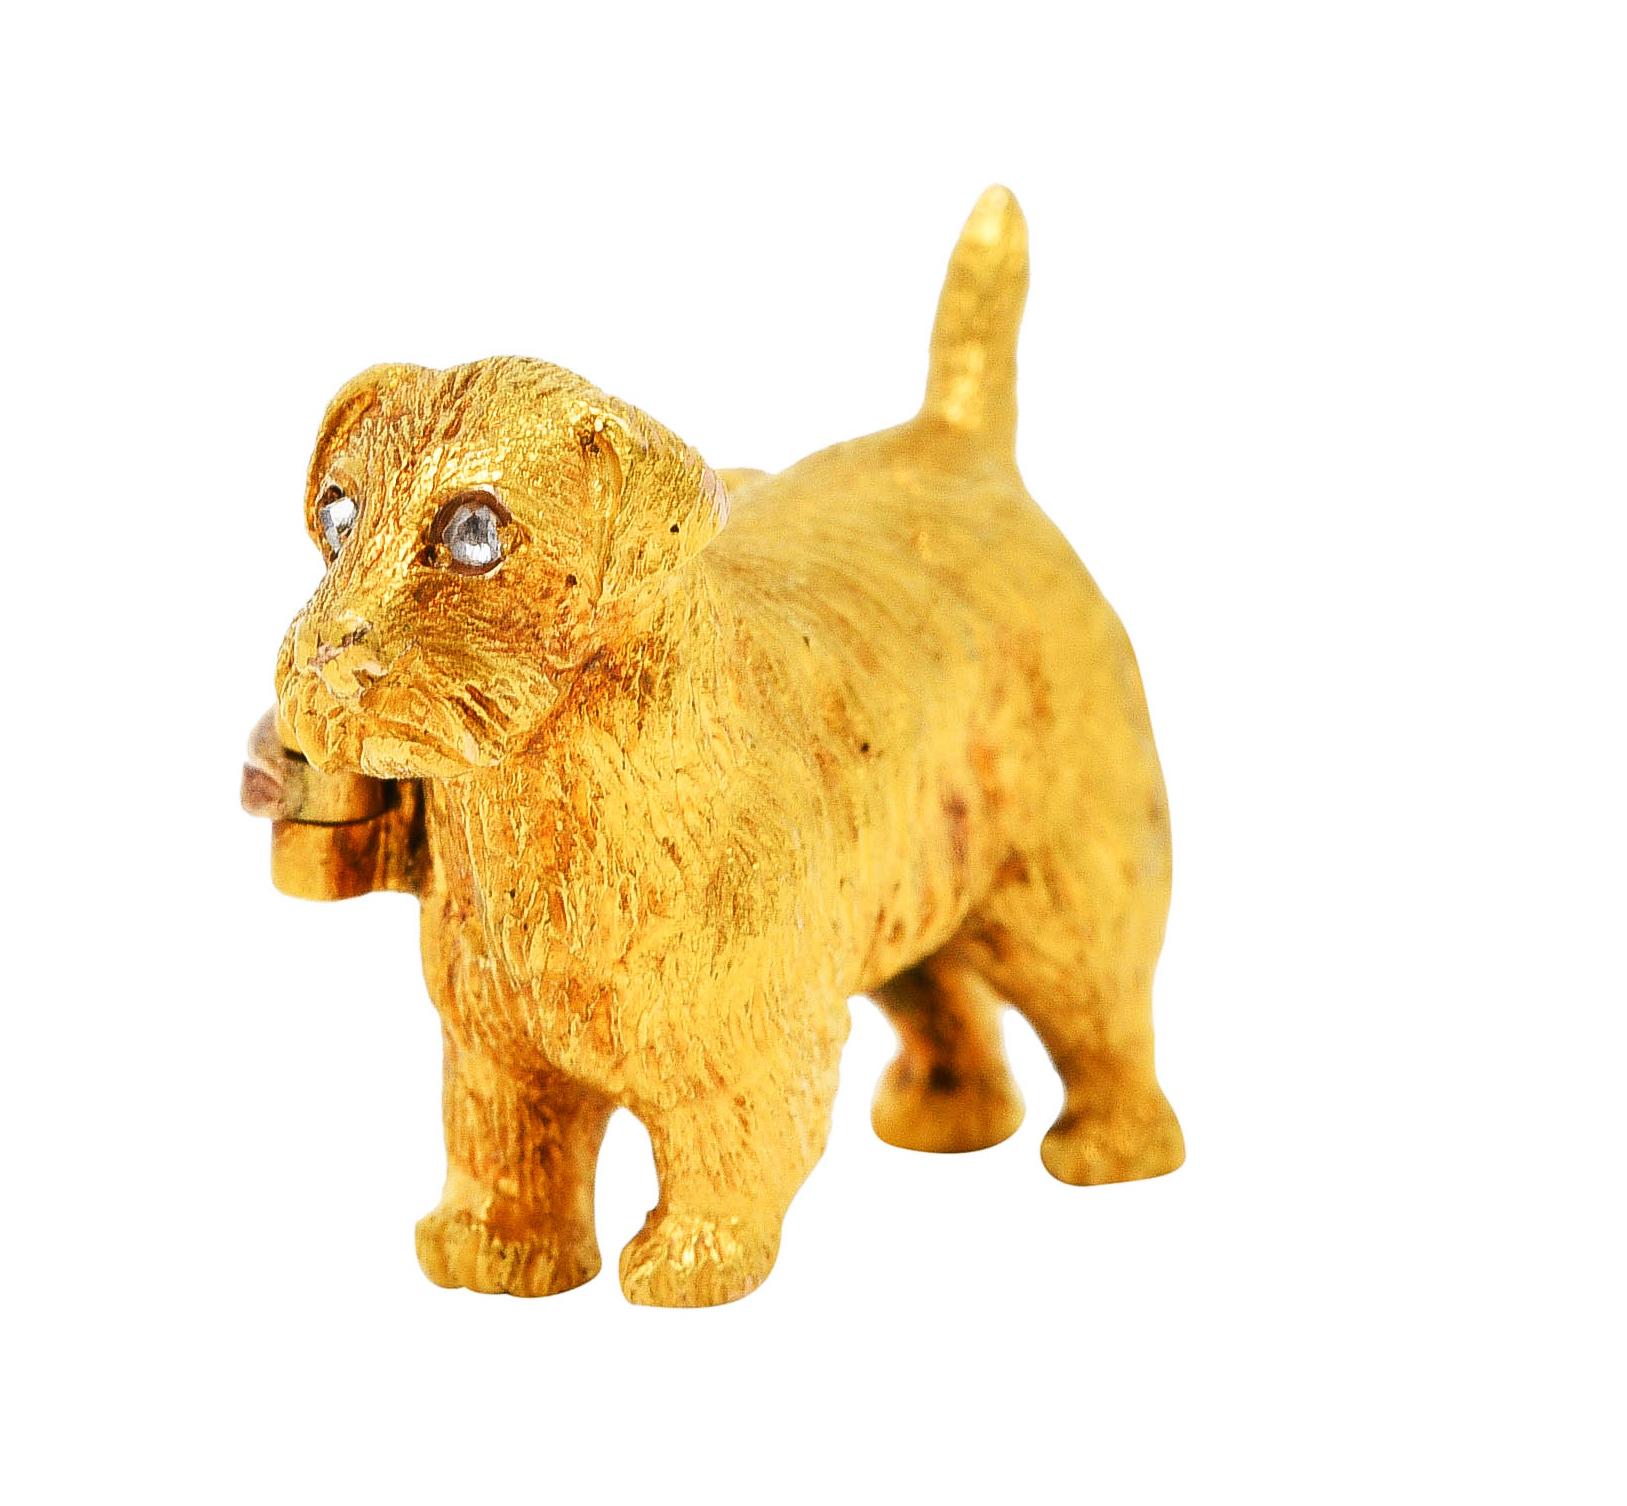 Brooch is designed as highly rendered terrier dog with texturous fur

Accented by rose cut diamond eyes - eye clean and bright

Completed by hinged pinstem with locking closure

Tested as 14 karat gold

Circa: 1900

Measures: 11/16 x 1 inch

Total